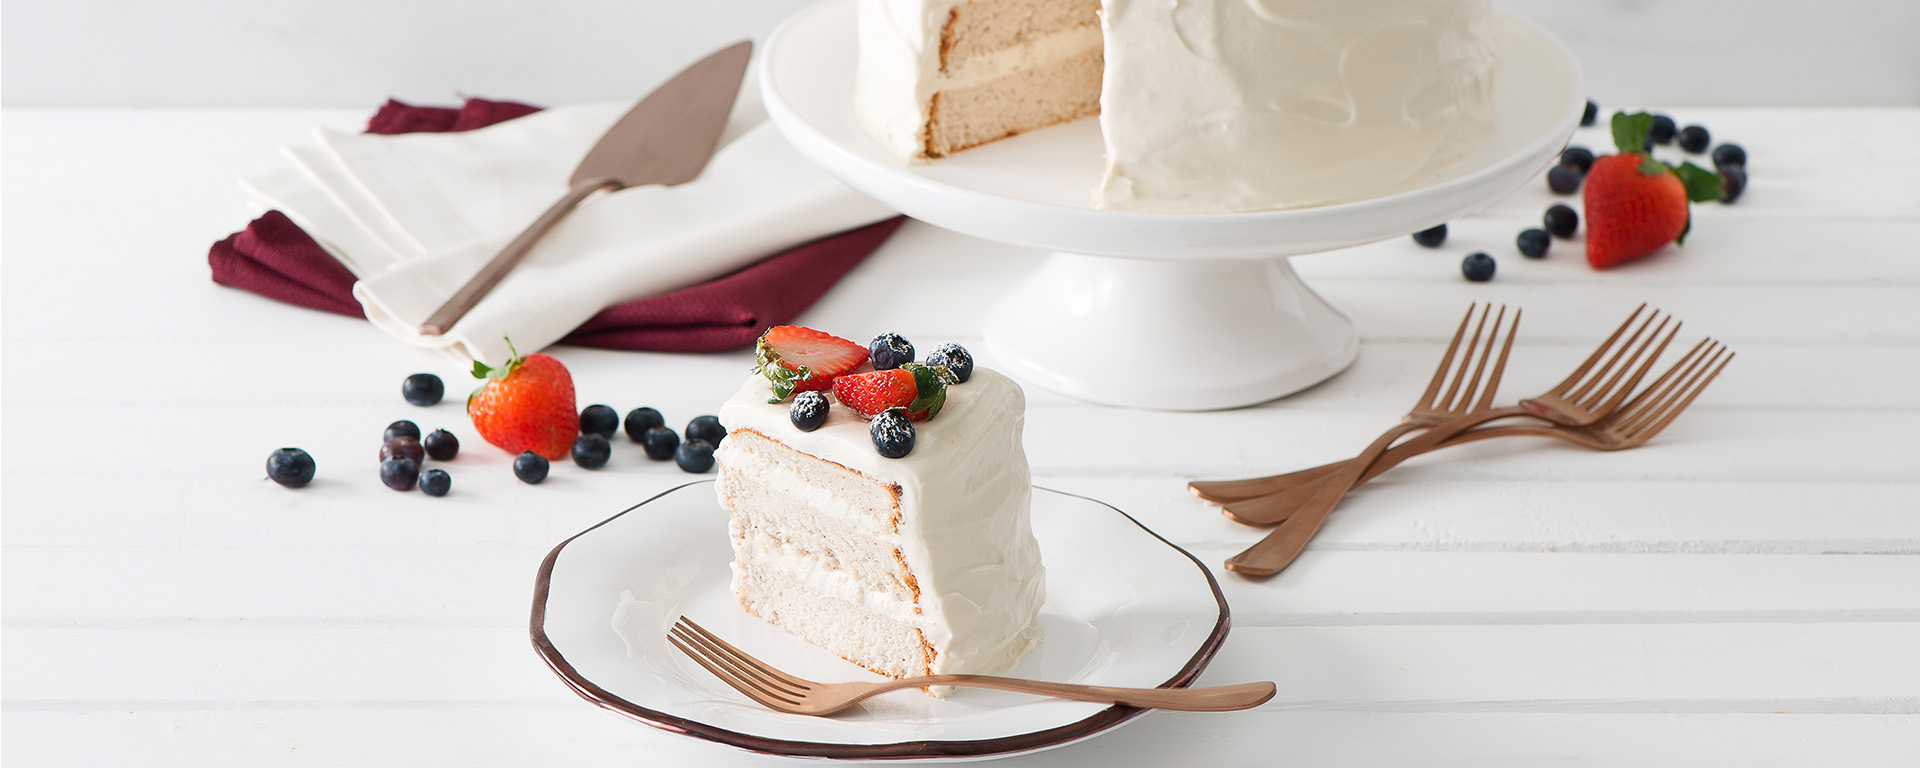 Photo for - Spiced Angel Food Cake with Sour Cream Frosting